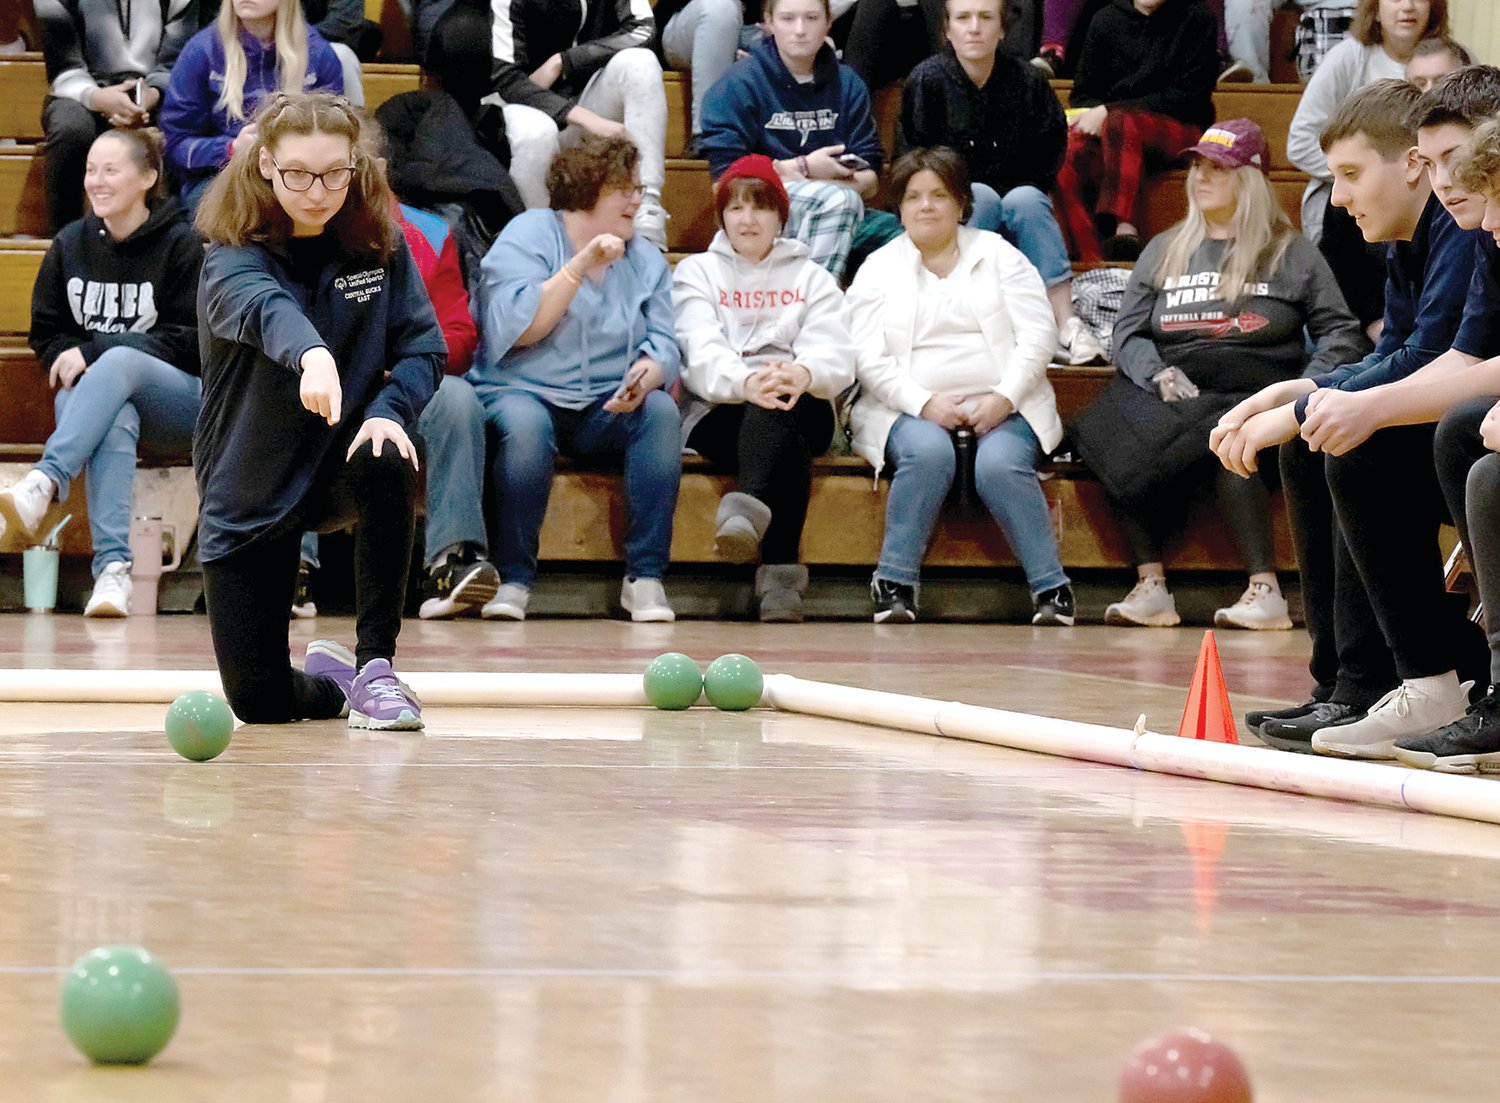 Charlotte Brock rolls the ball down the court during the regional championships March 3. The Central Bucks Unified Sports Bocce Team won first place.